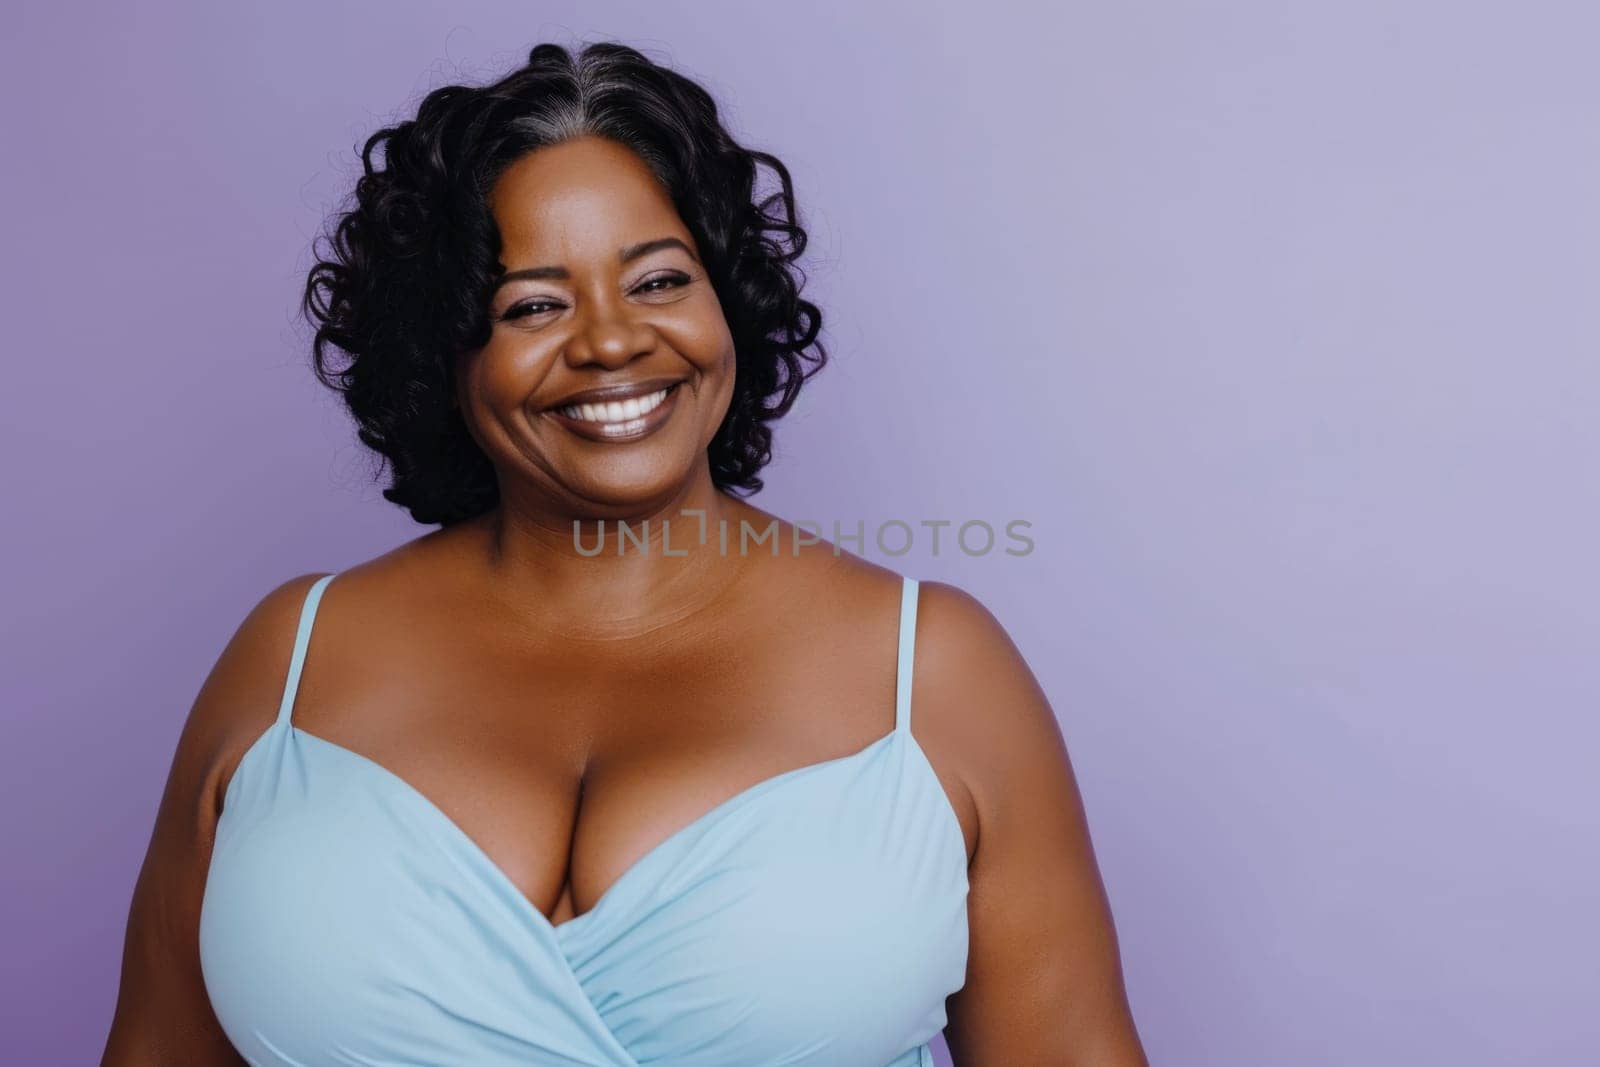 Adult African American Woman in Blue Dress on Purple Background by Yurich32